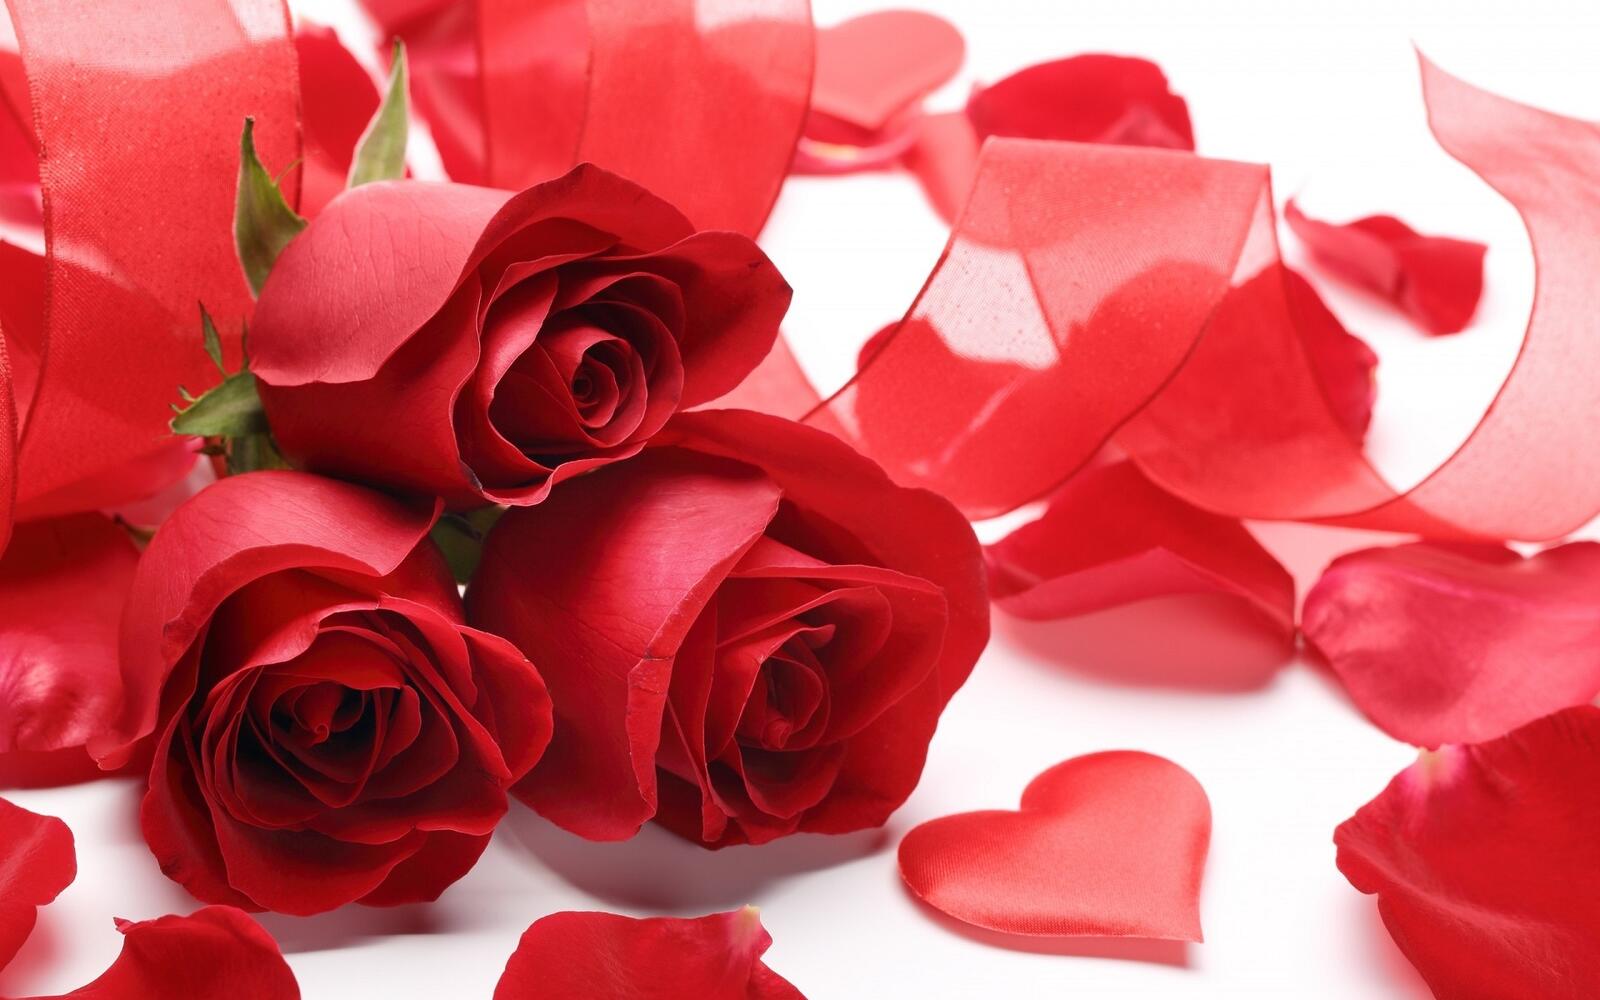 Free photo Three red roses with heart-shaped petals